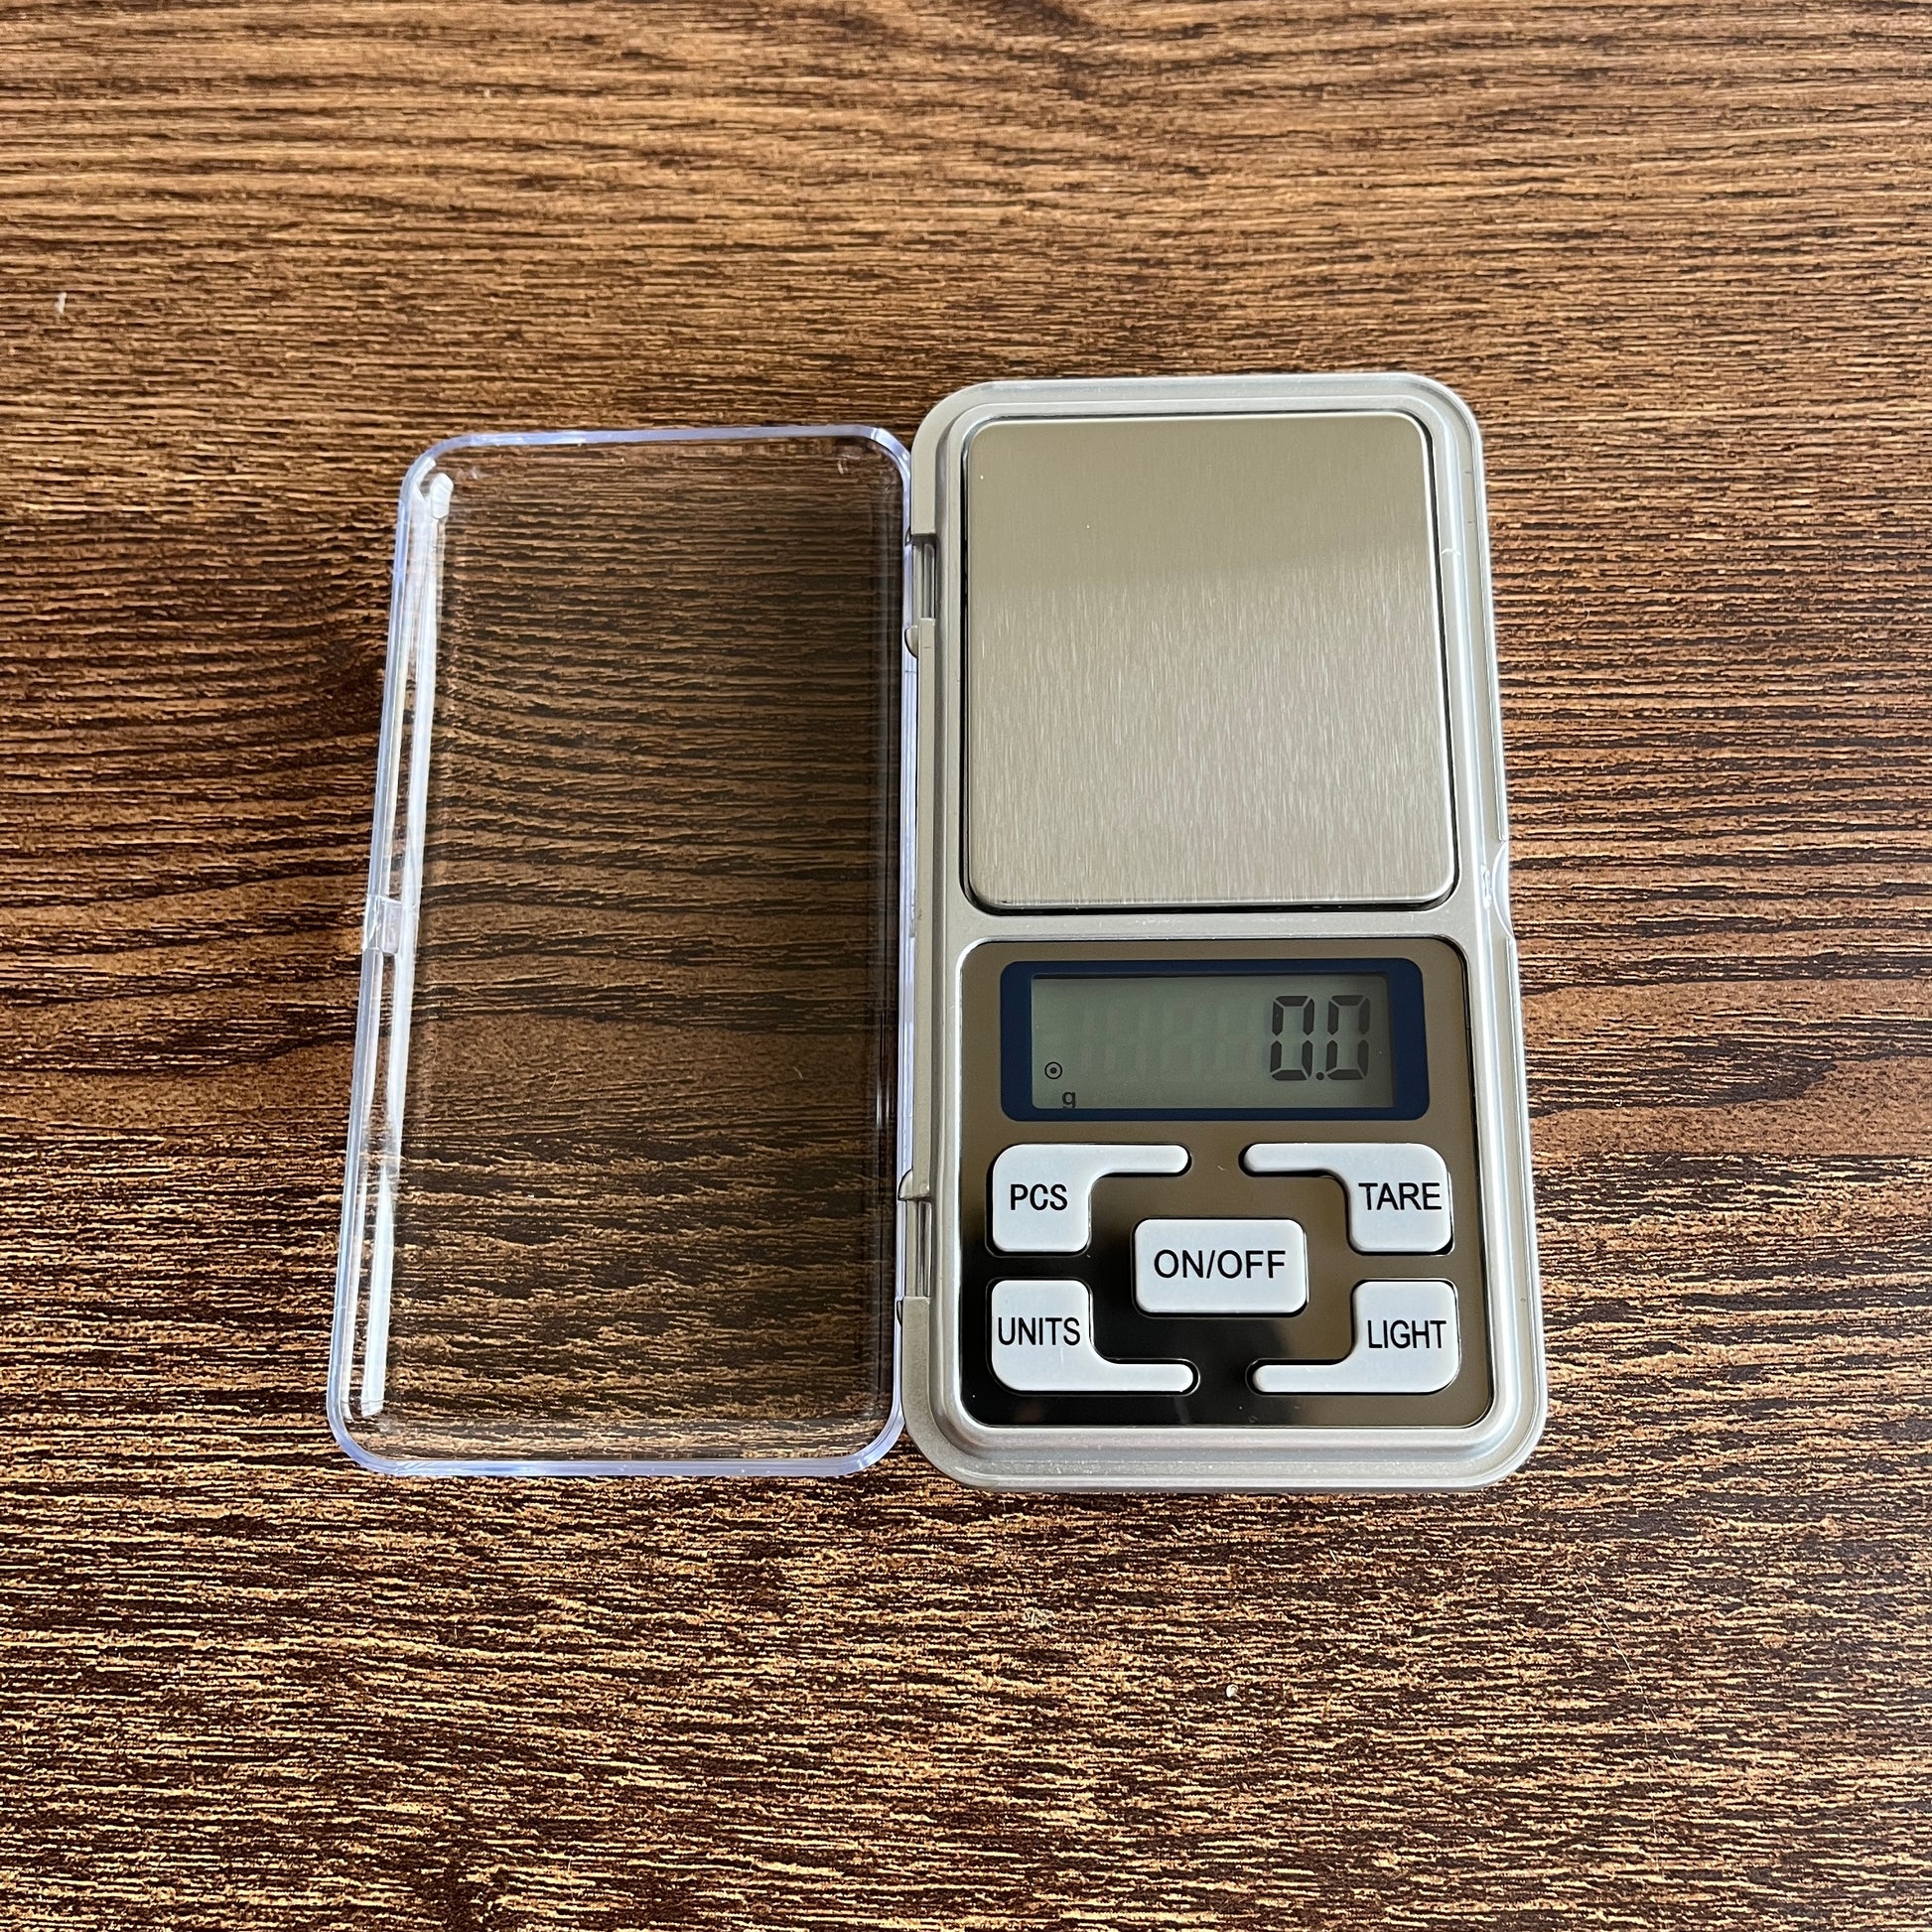 pocket scales Precision coffee Brewing scale budget scales Amazon coffee brewing scale Basic Barista dosing coffee scale 